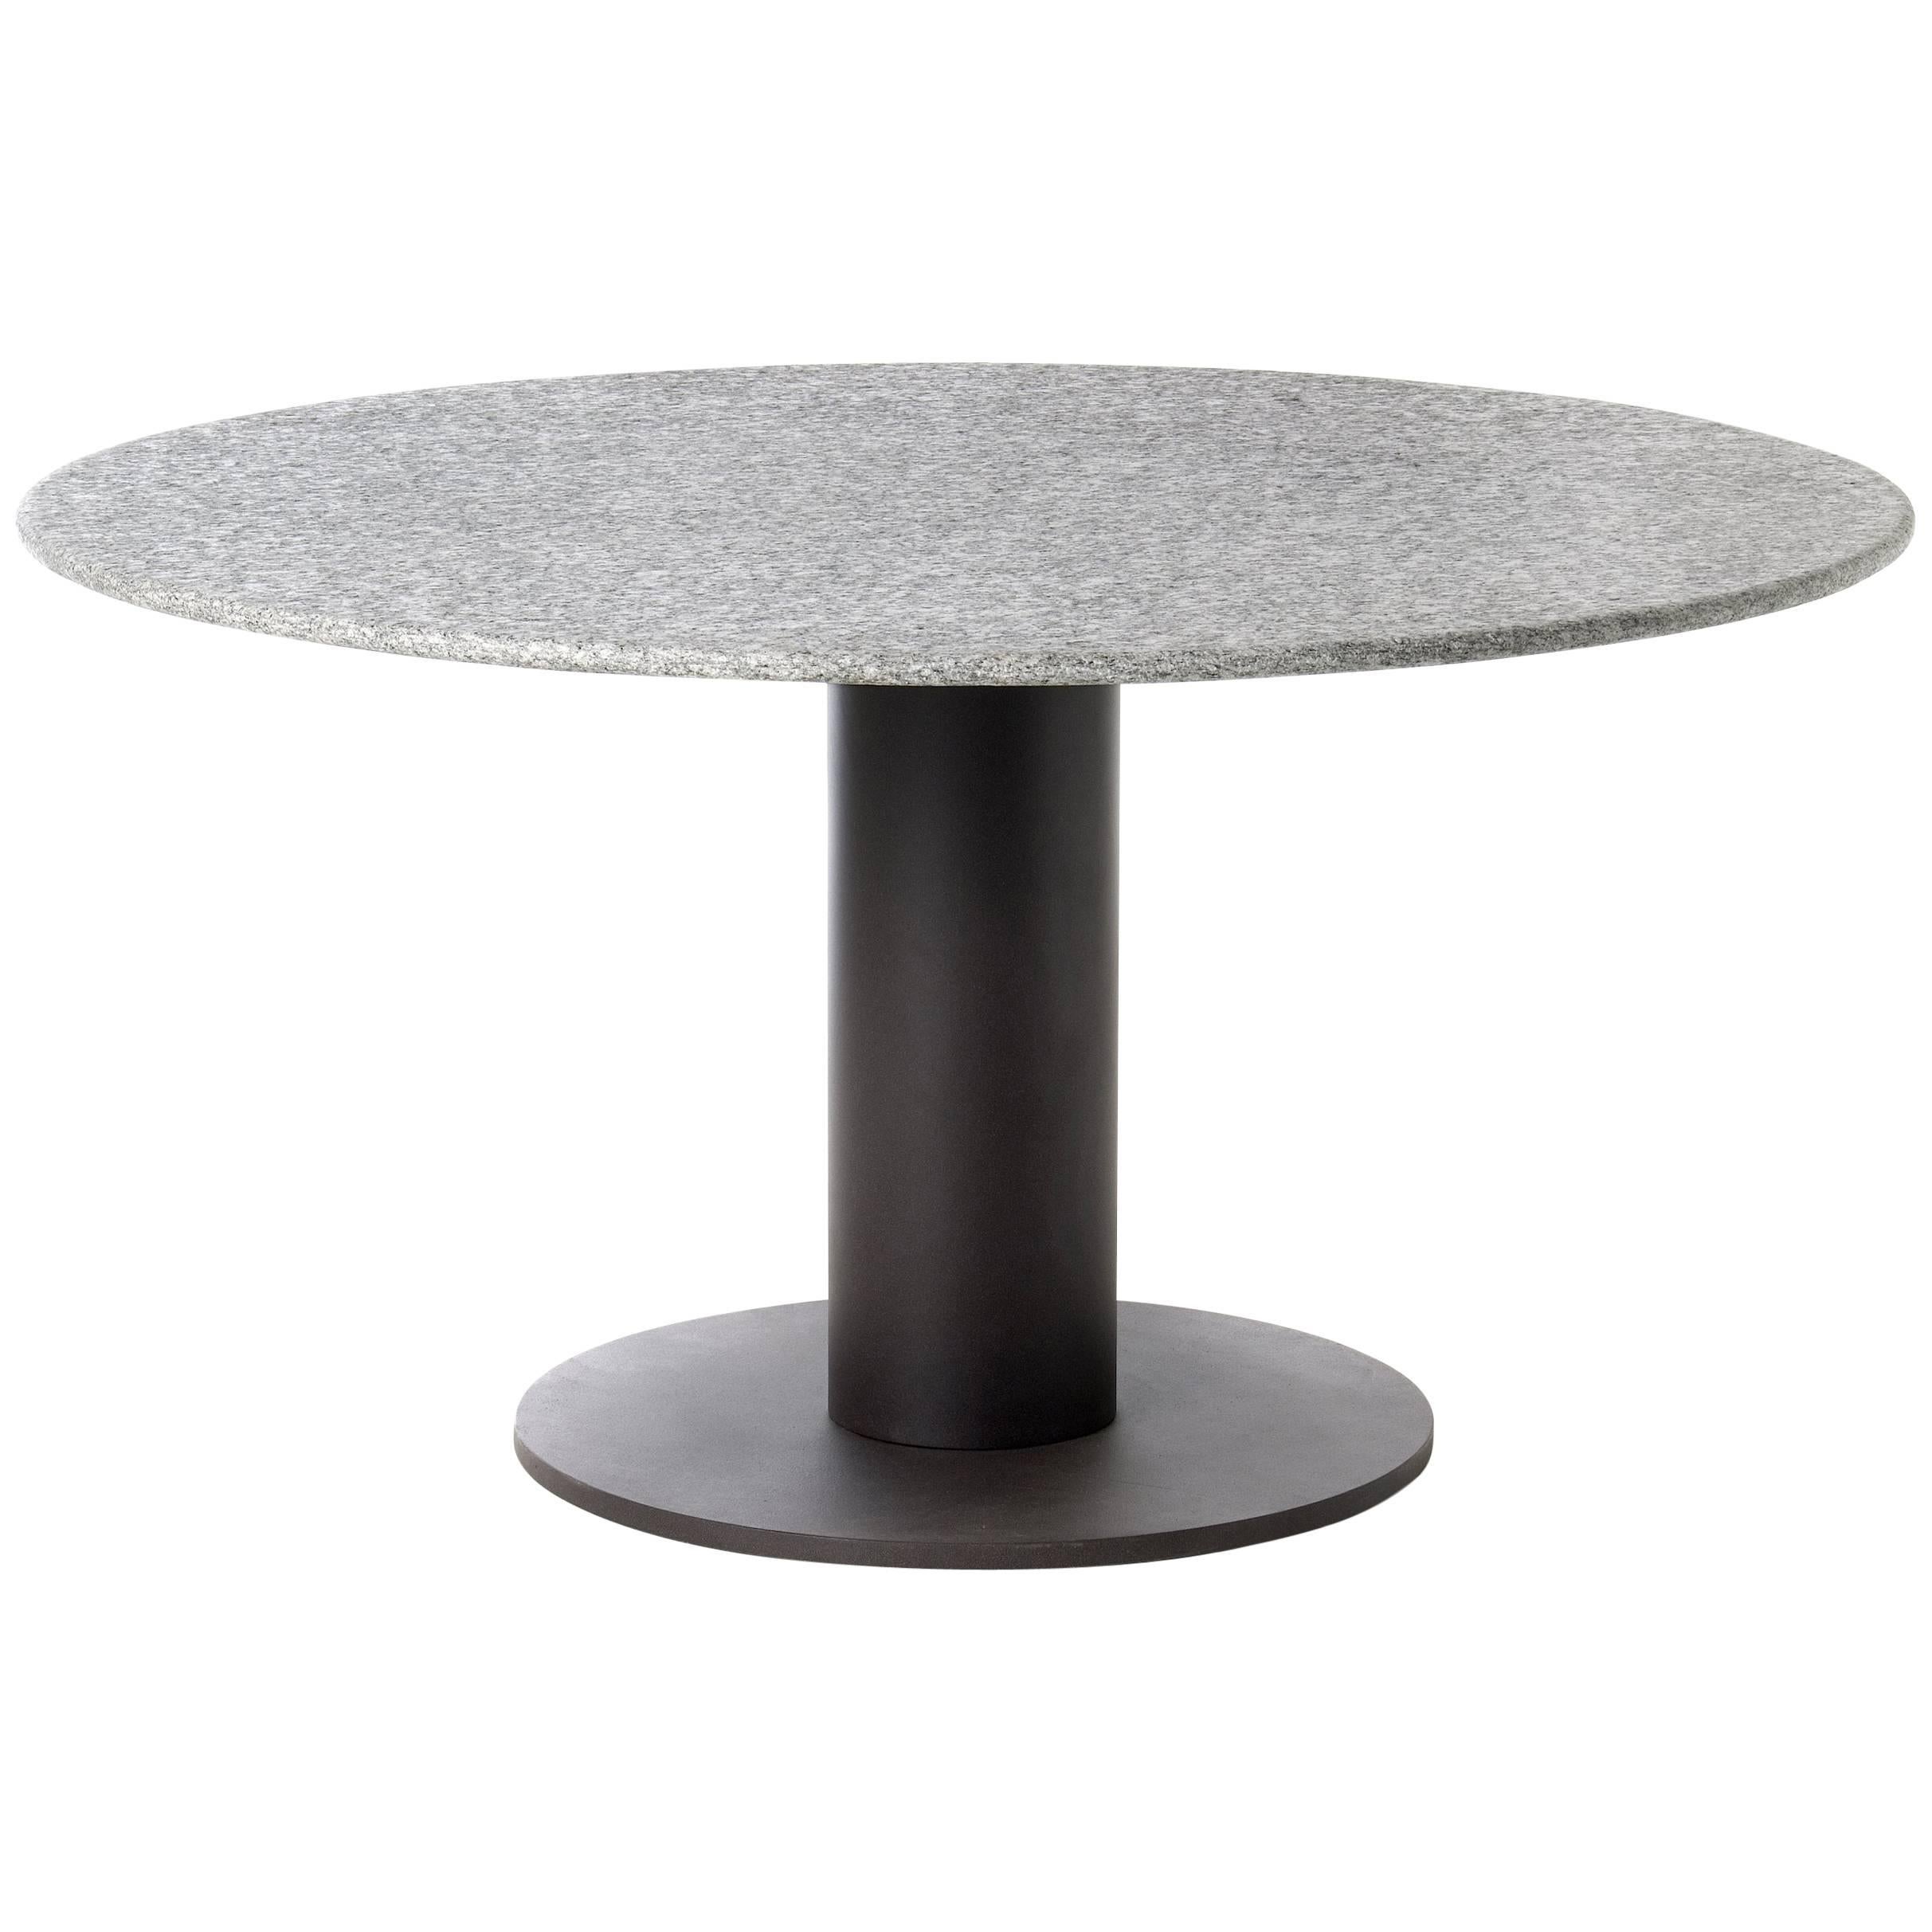 Roda Platter Round Dining Table for Outdoors in Stone or HPL with Steel Base For Sale